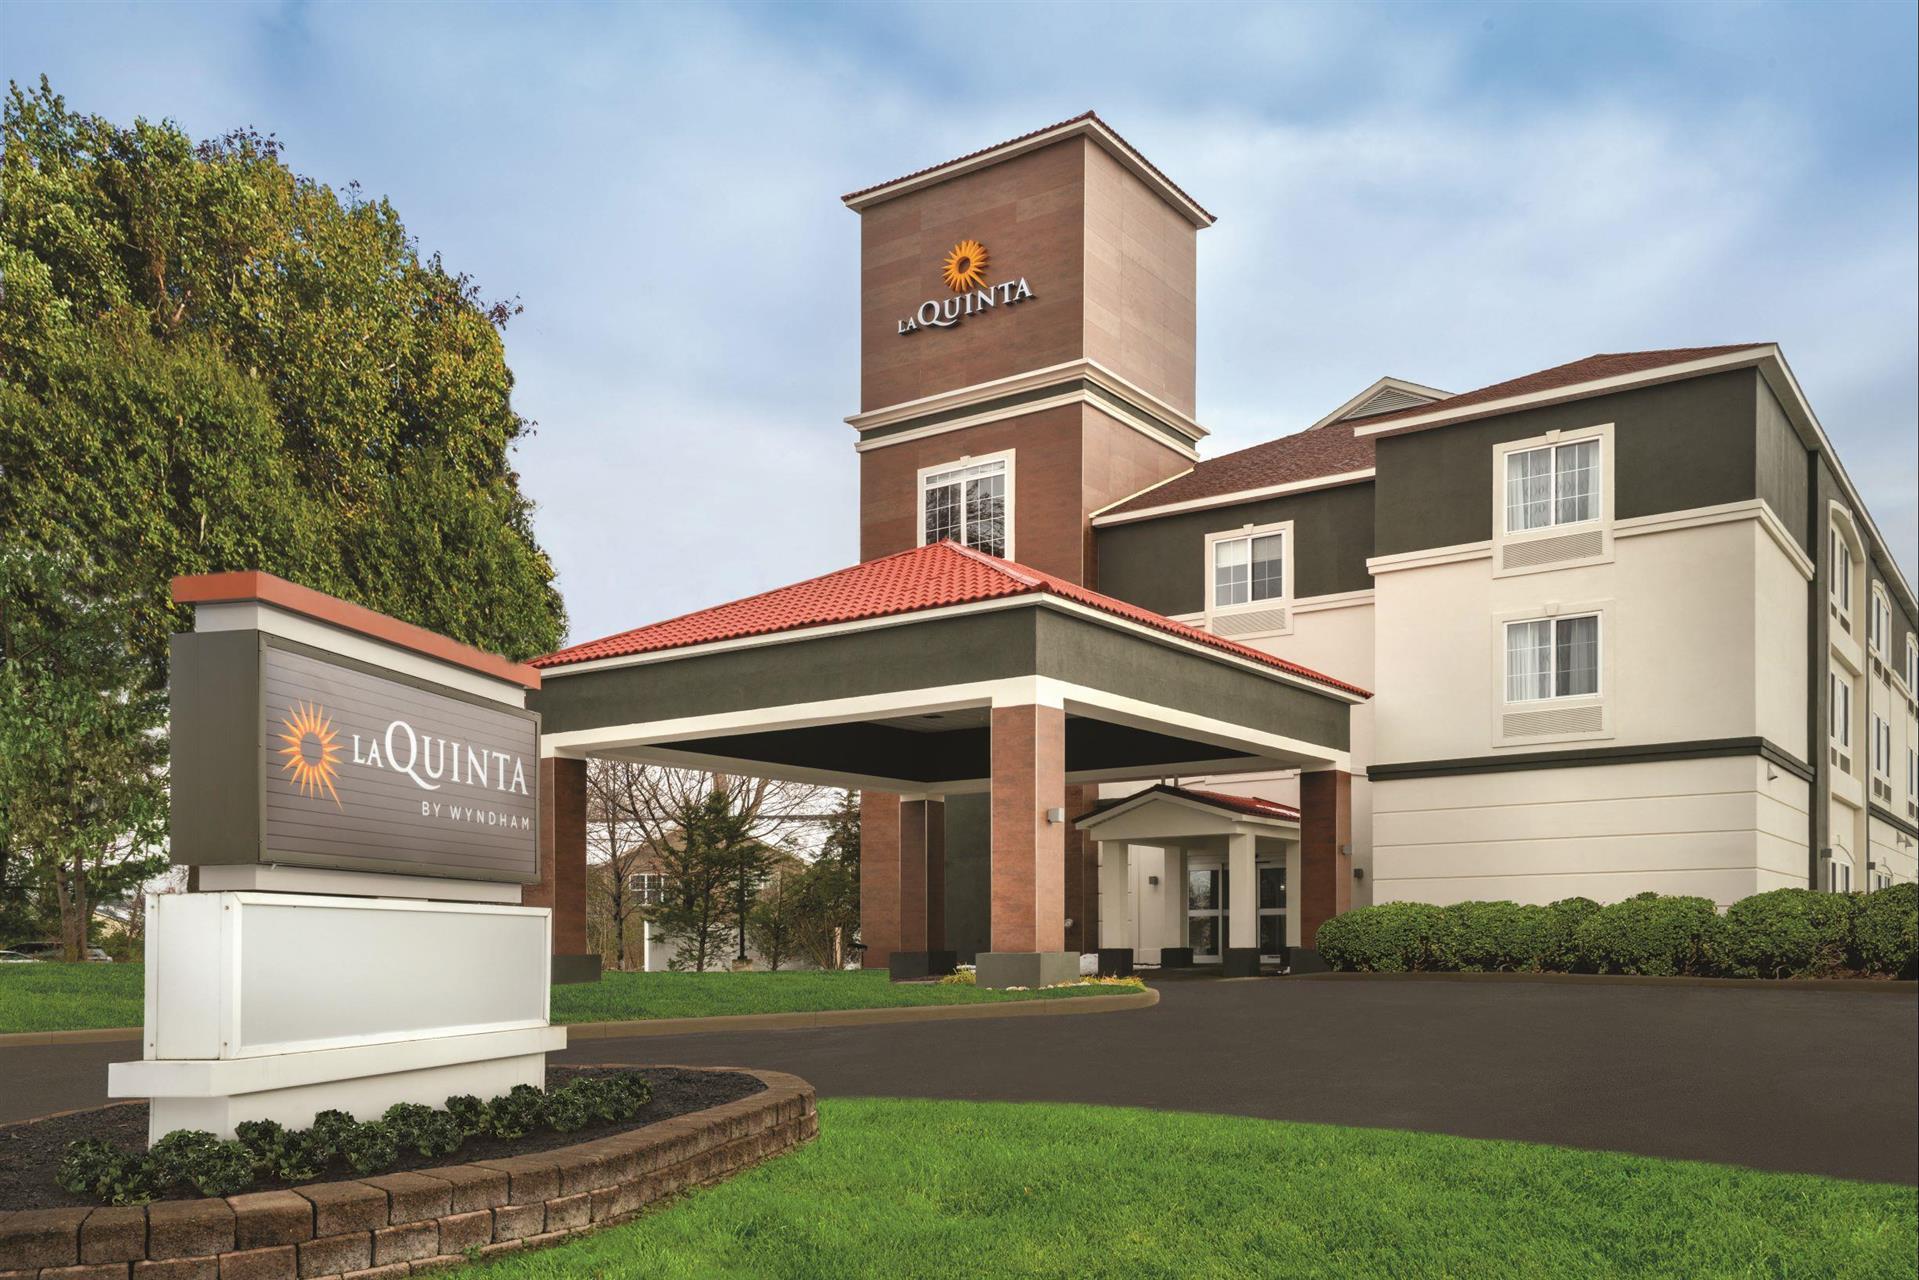 La Quinta Inn & Suites by Wyndham Latham Albany Airport in Colonie, NY